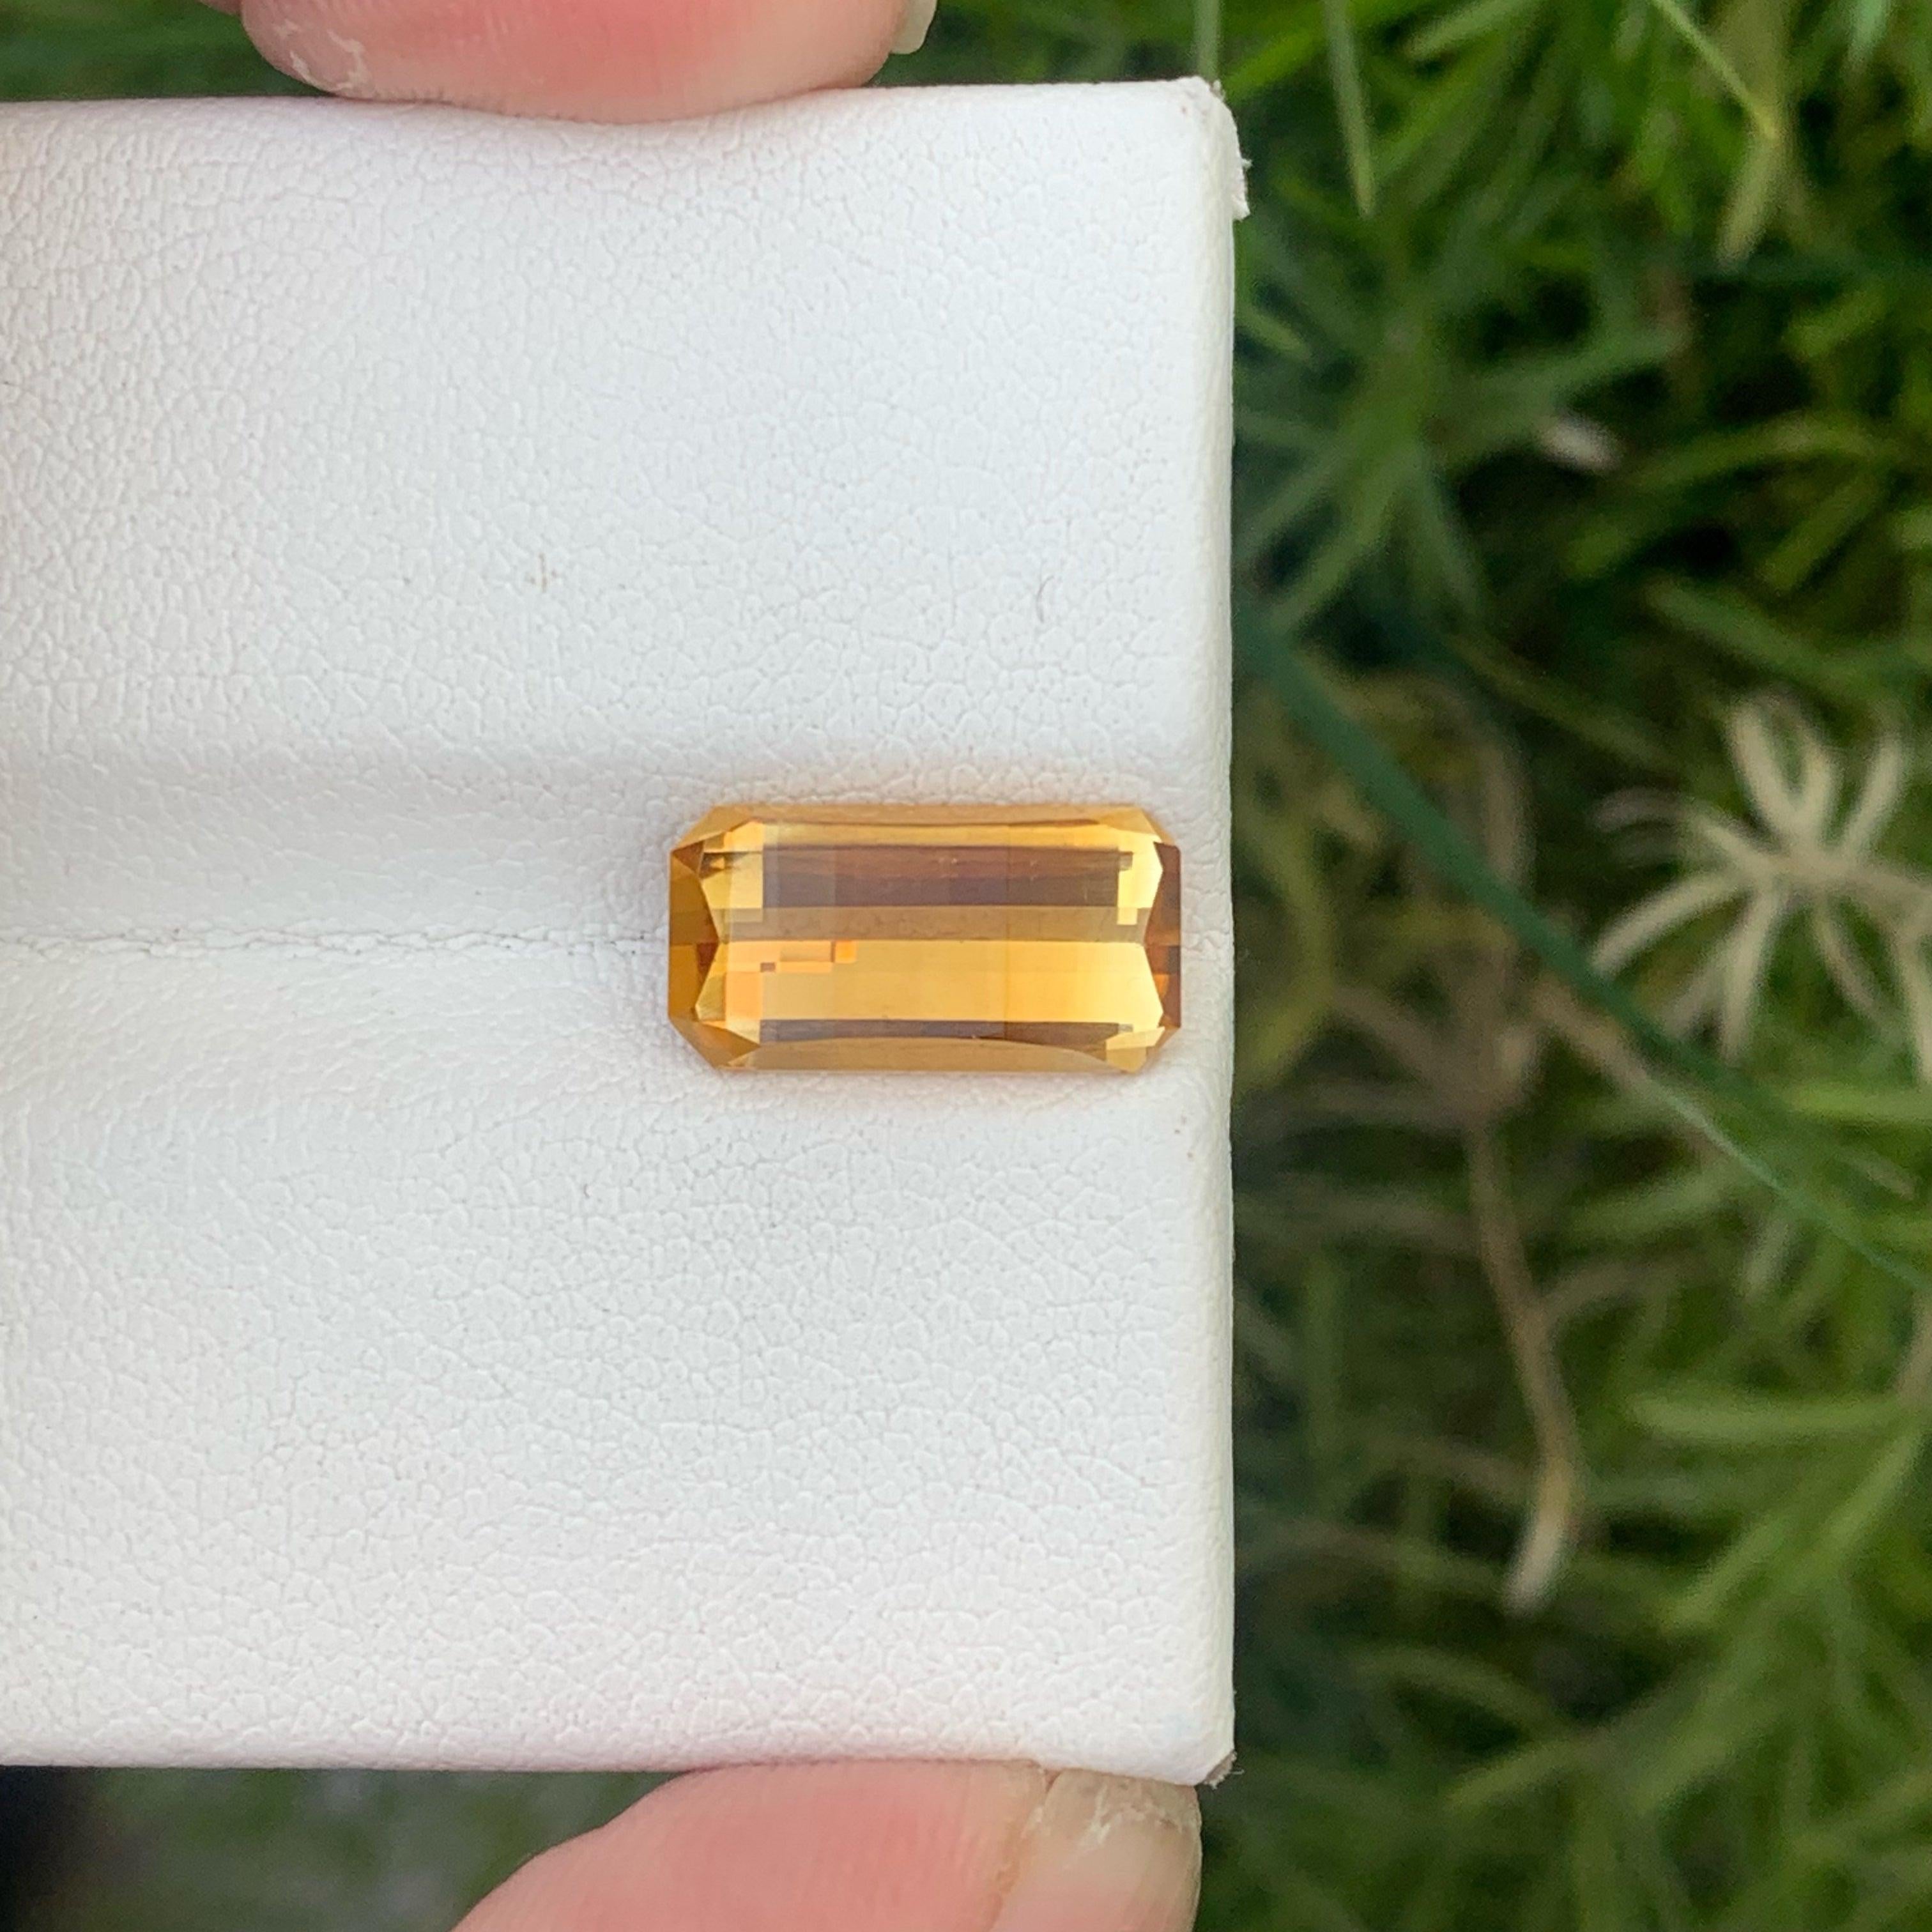 Fantastic Natural Cut Citrine Gemstone, available for sale at wholesale price natural high quality 3.20 Carats loose citrine from brazil.

Product Information:
GEMSTONE TYPE:	Fantastic Natural Cut Citrine Gemstone
WEIGHT:	3.20